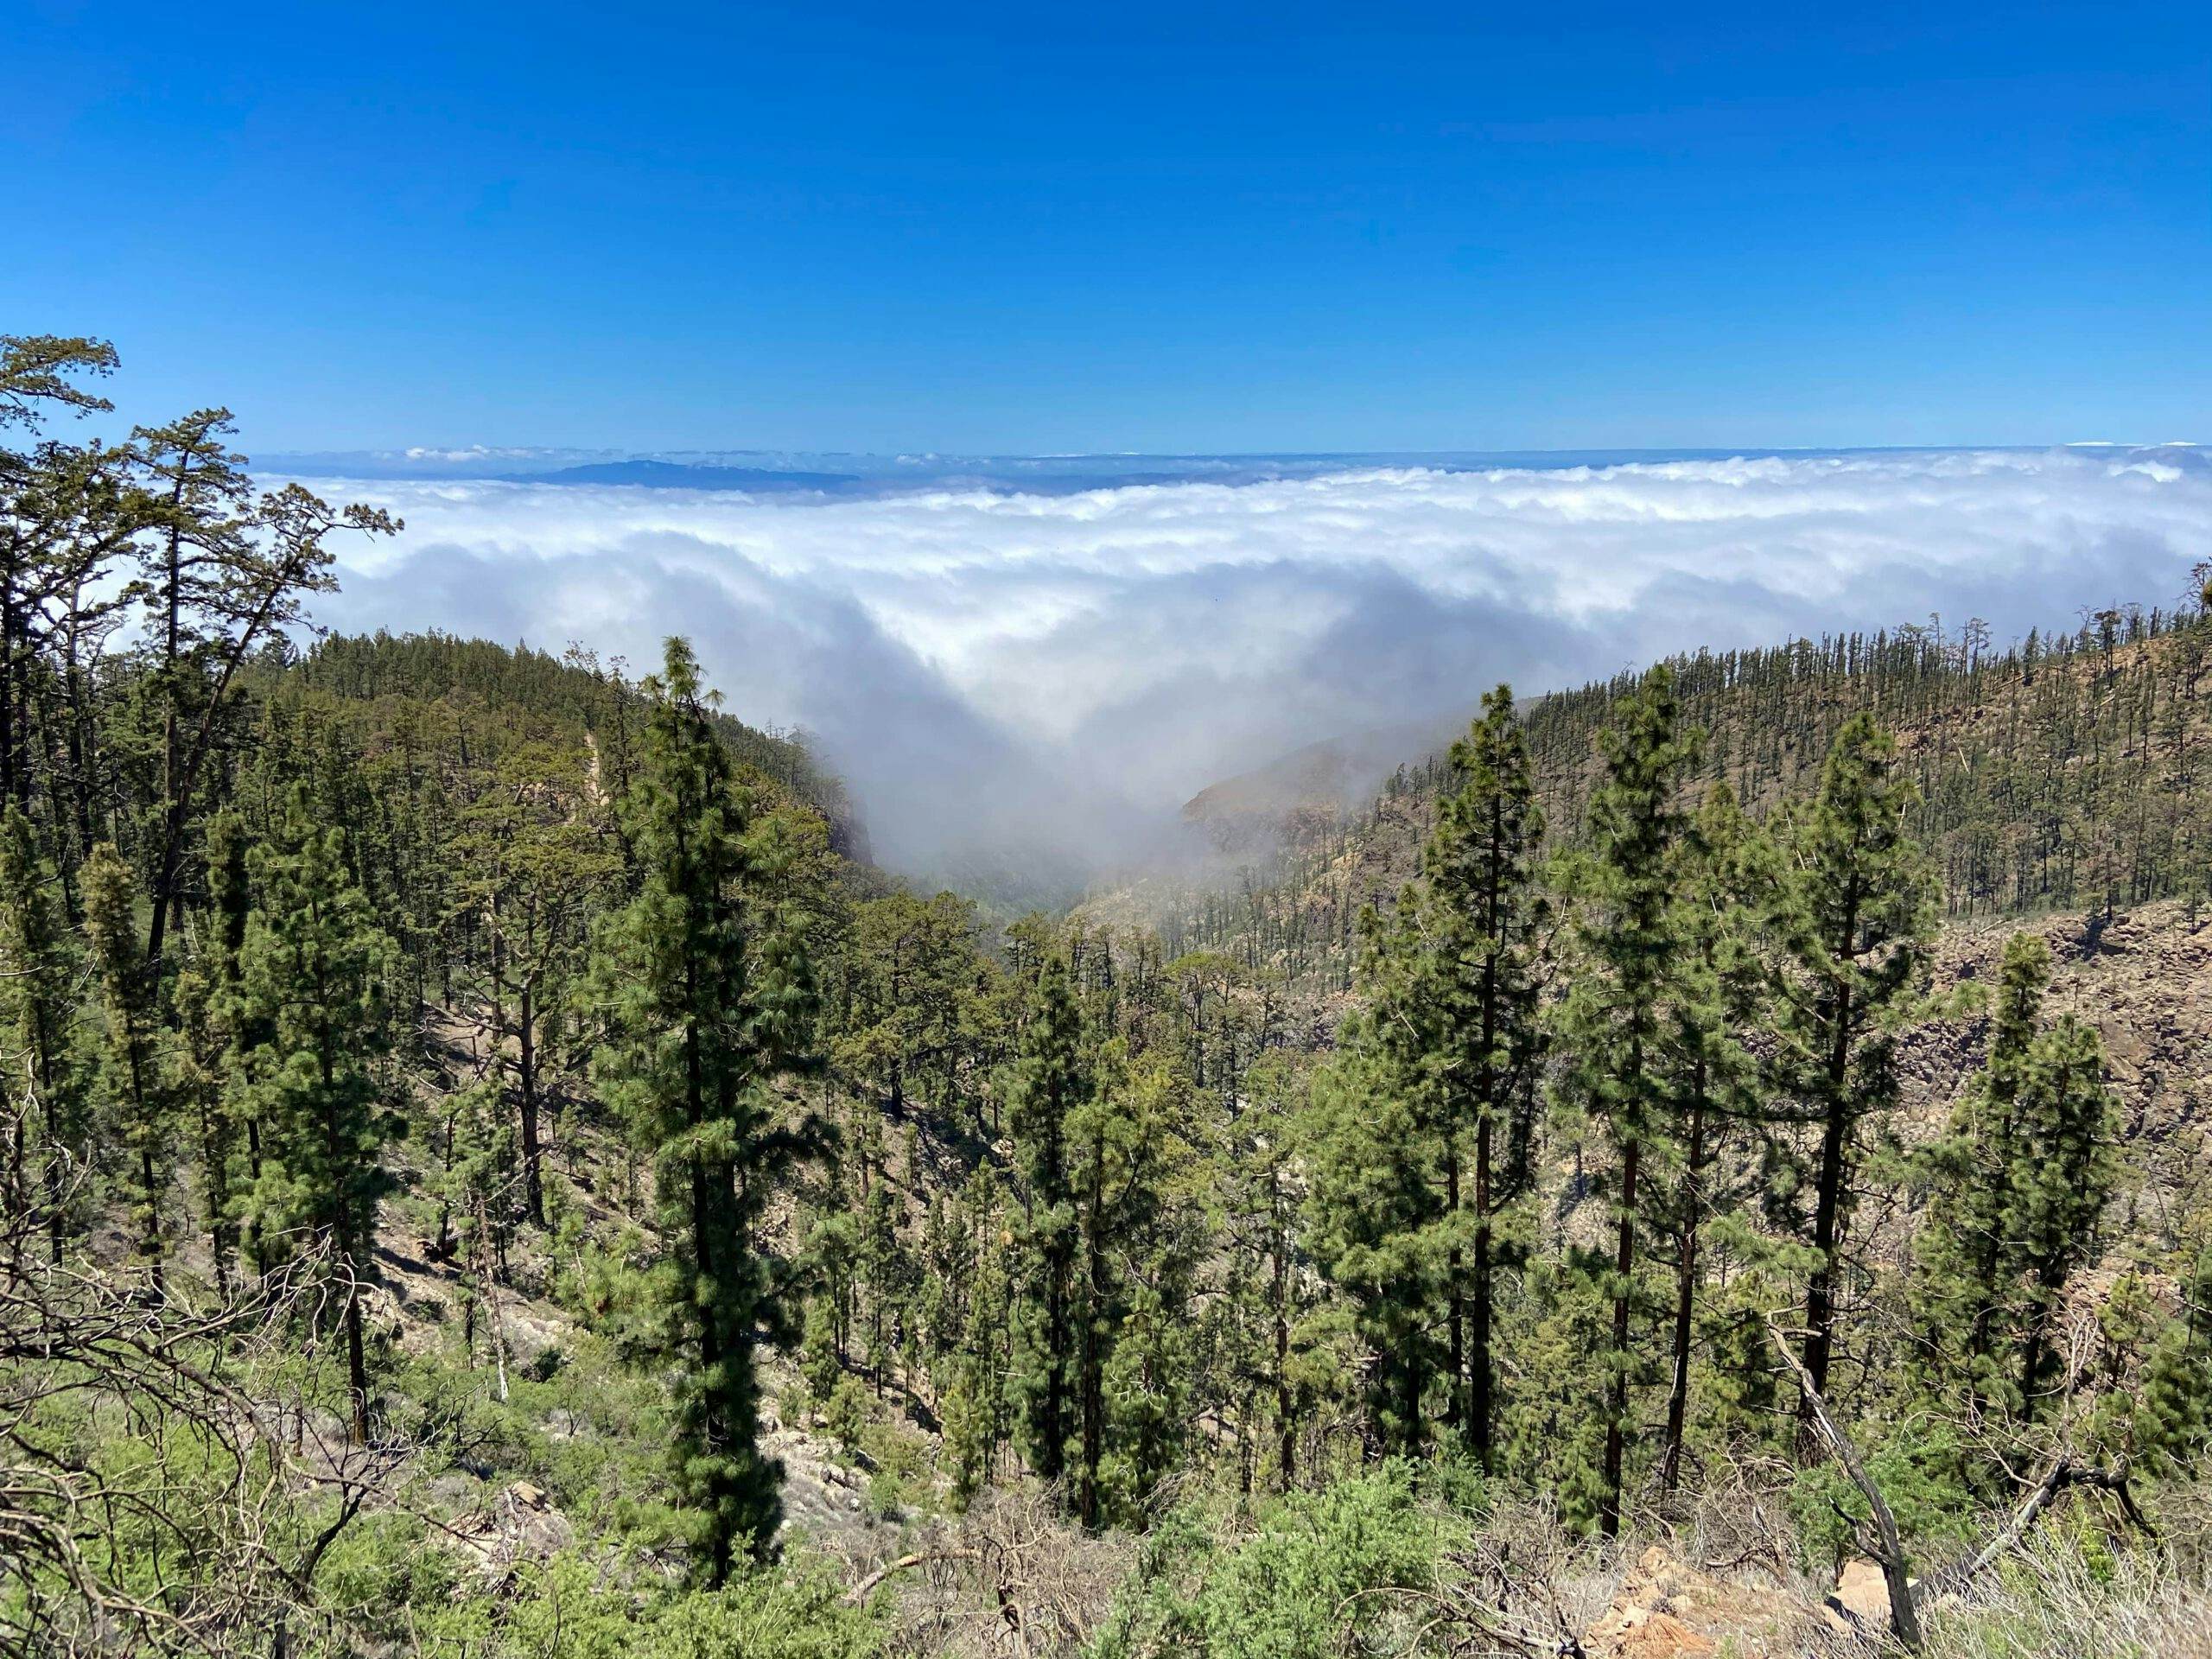 View from above the clouds to the neighbouring islands of La Gomera and La Palma